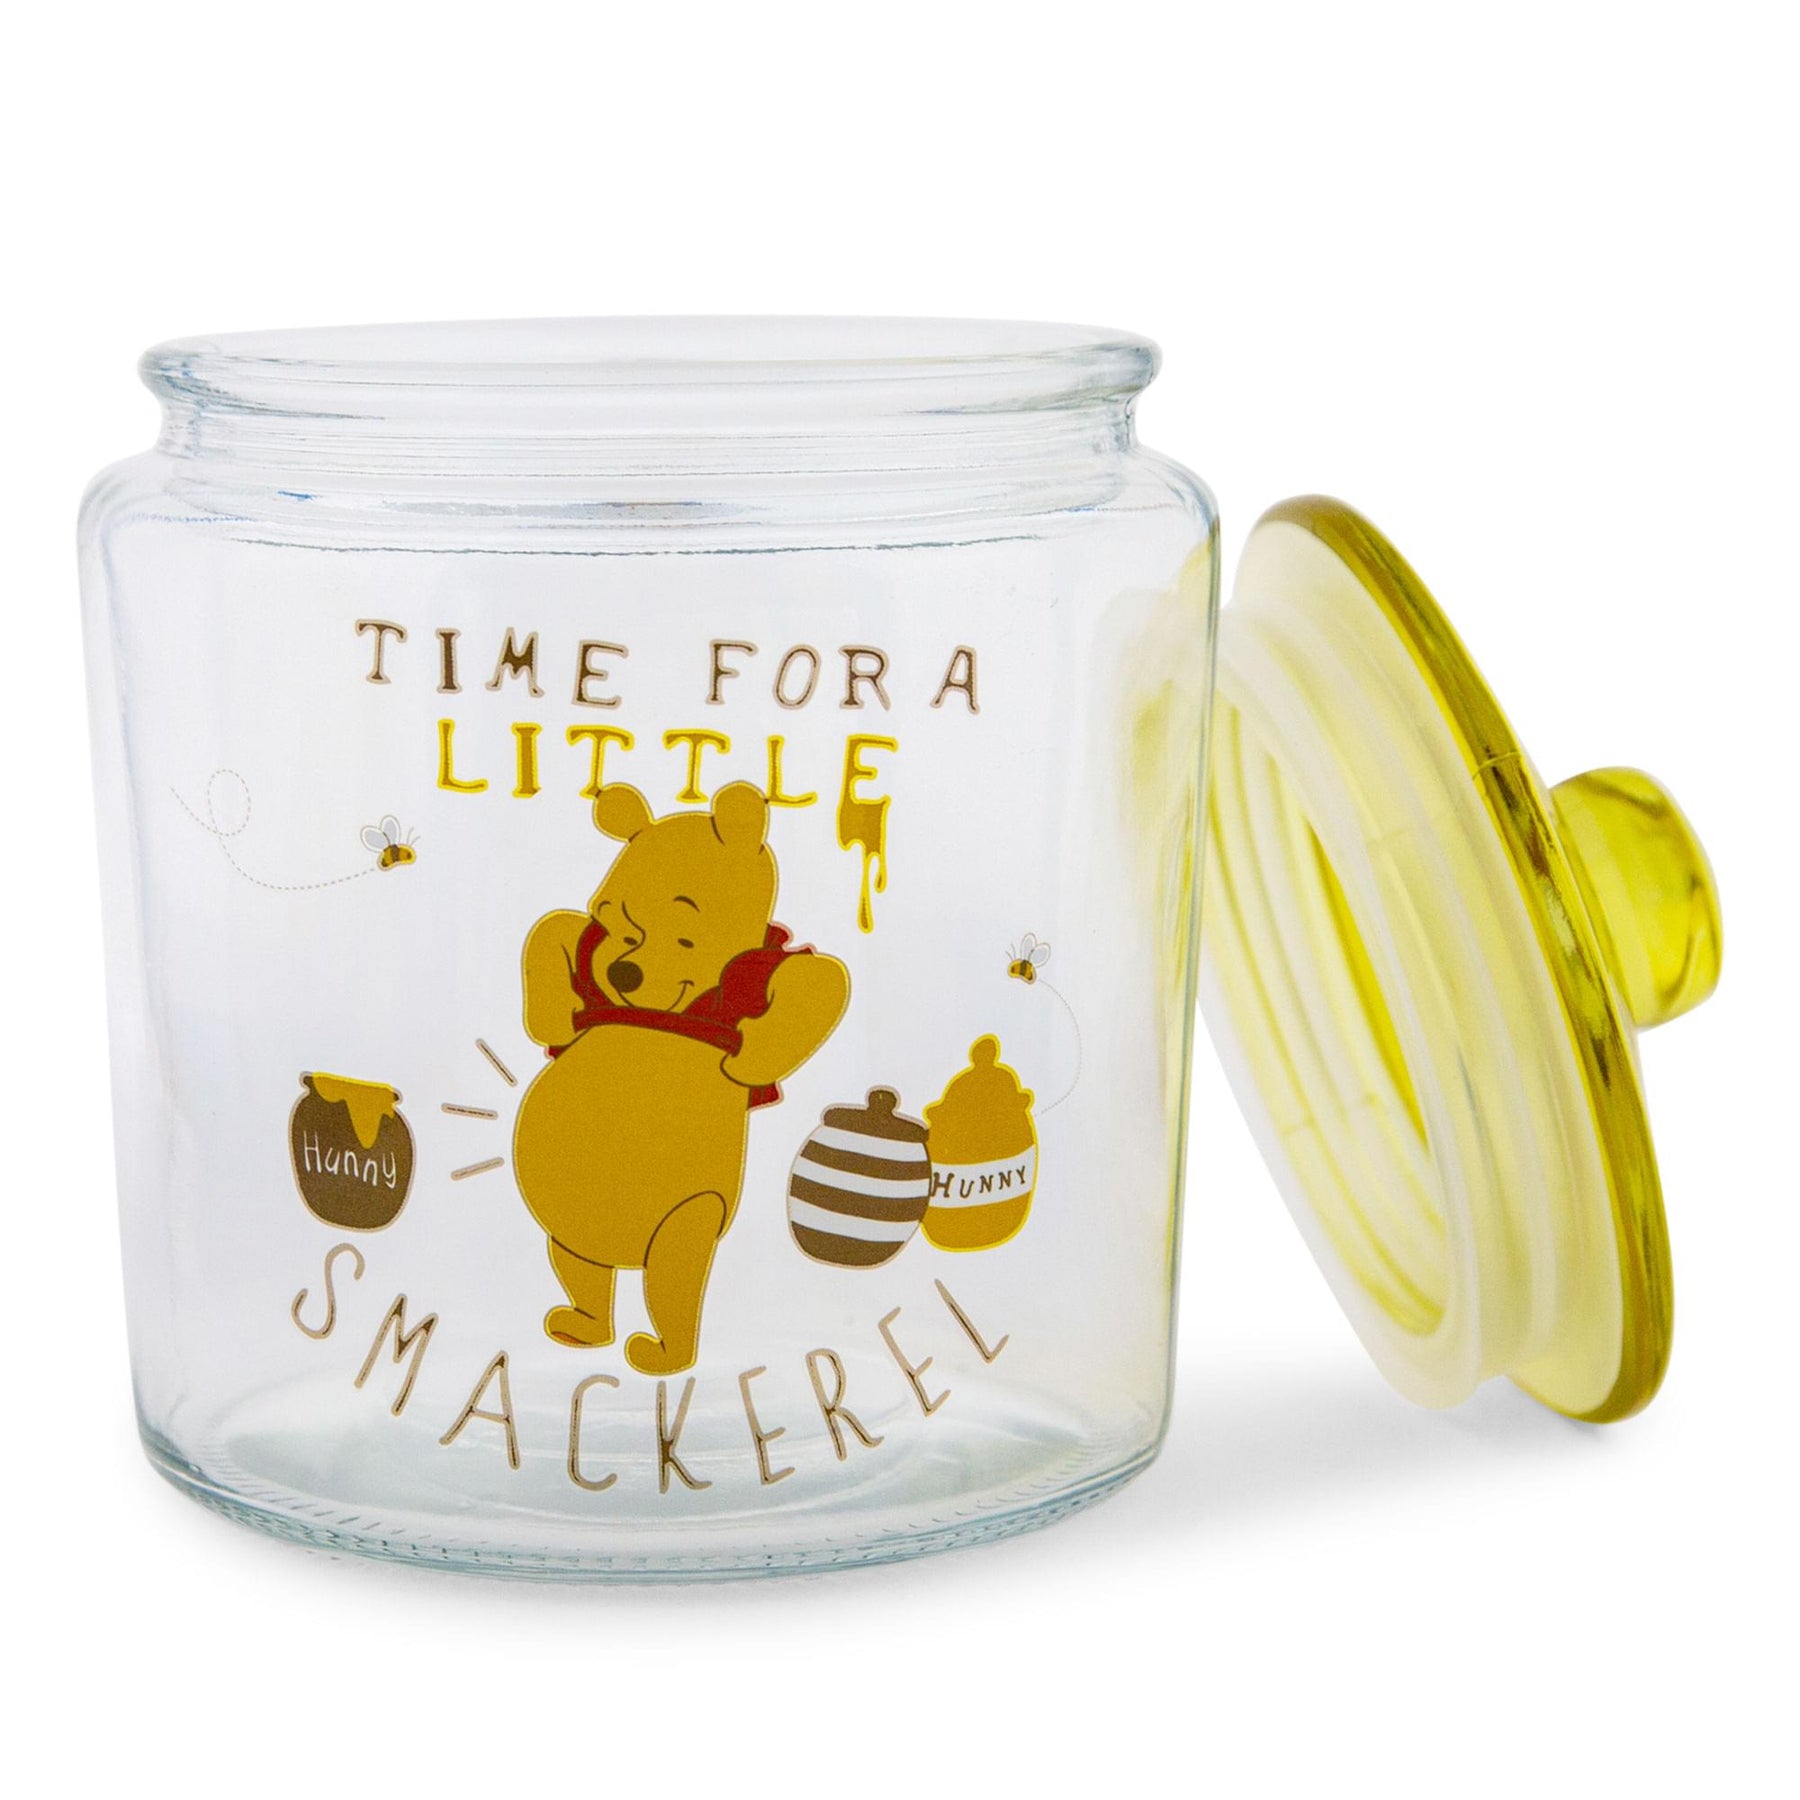 Disney Winnie the Pooh Glass Snack Jar Container With Lid | 6 Inches Tall